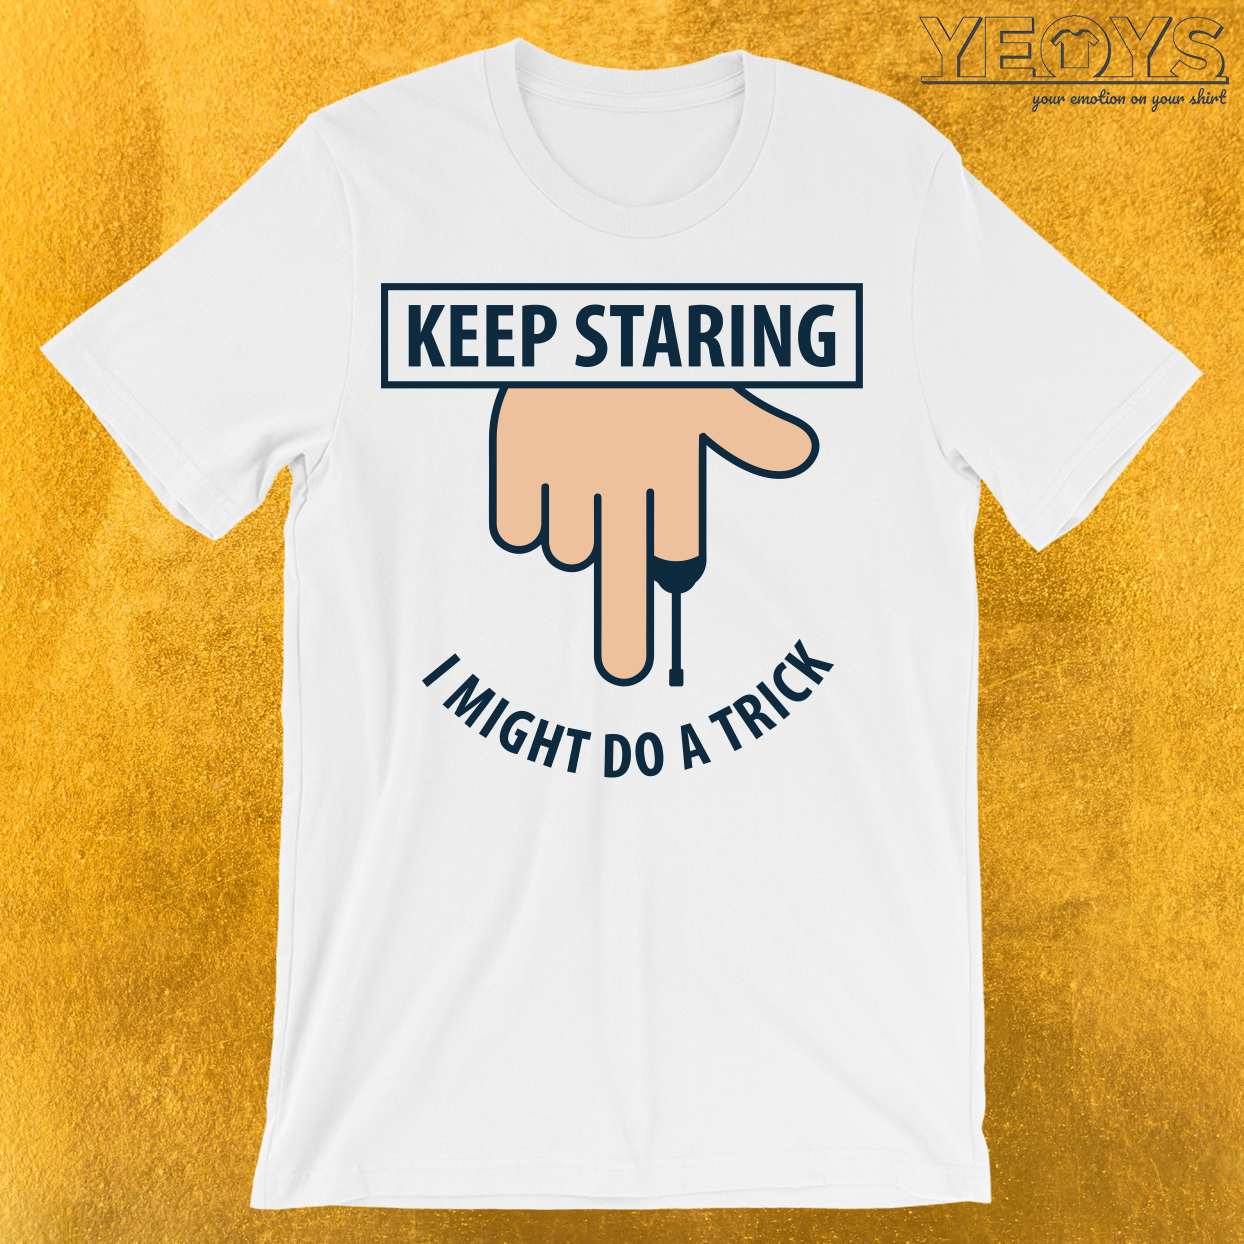 Keep Staring I Might Do A Trick T-Shirt